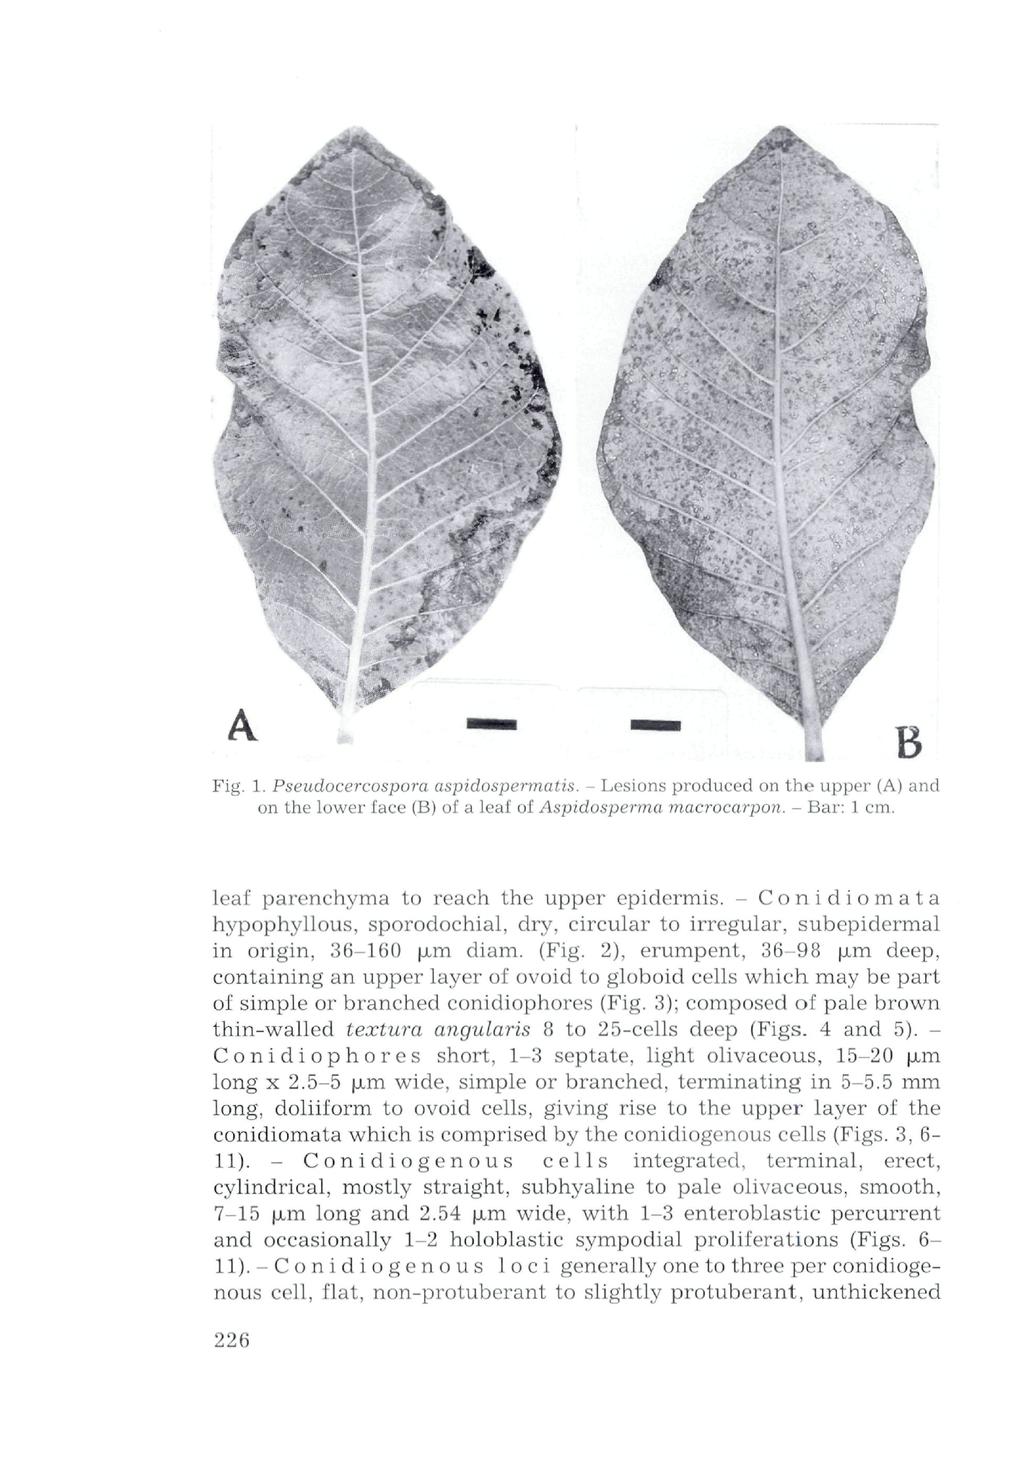 B Fig. 1. Pseudocercospora aspidospermaüs. - Lesions produced on the upper (A) and on the lower face (B) of a leaf of Aspidosperma macrocarpon. - Bar: 1 cm.